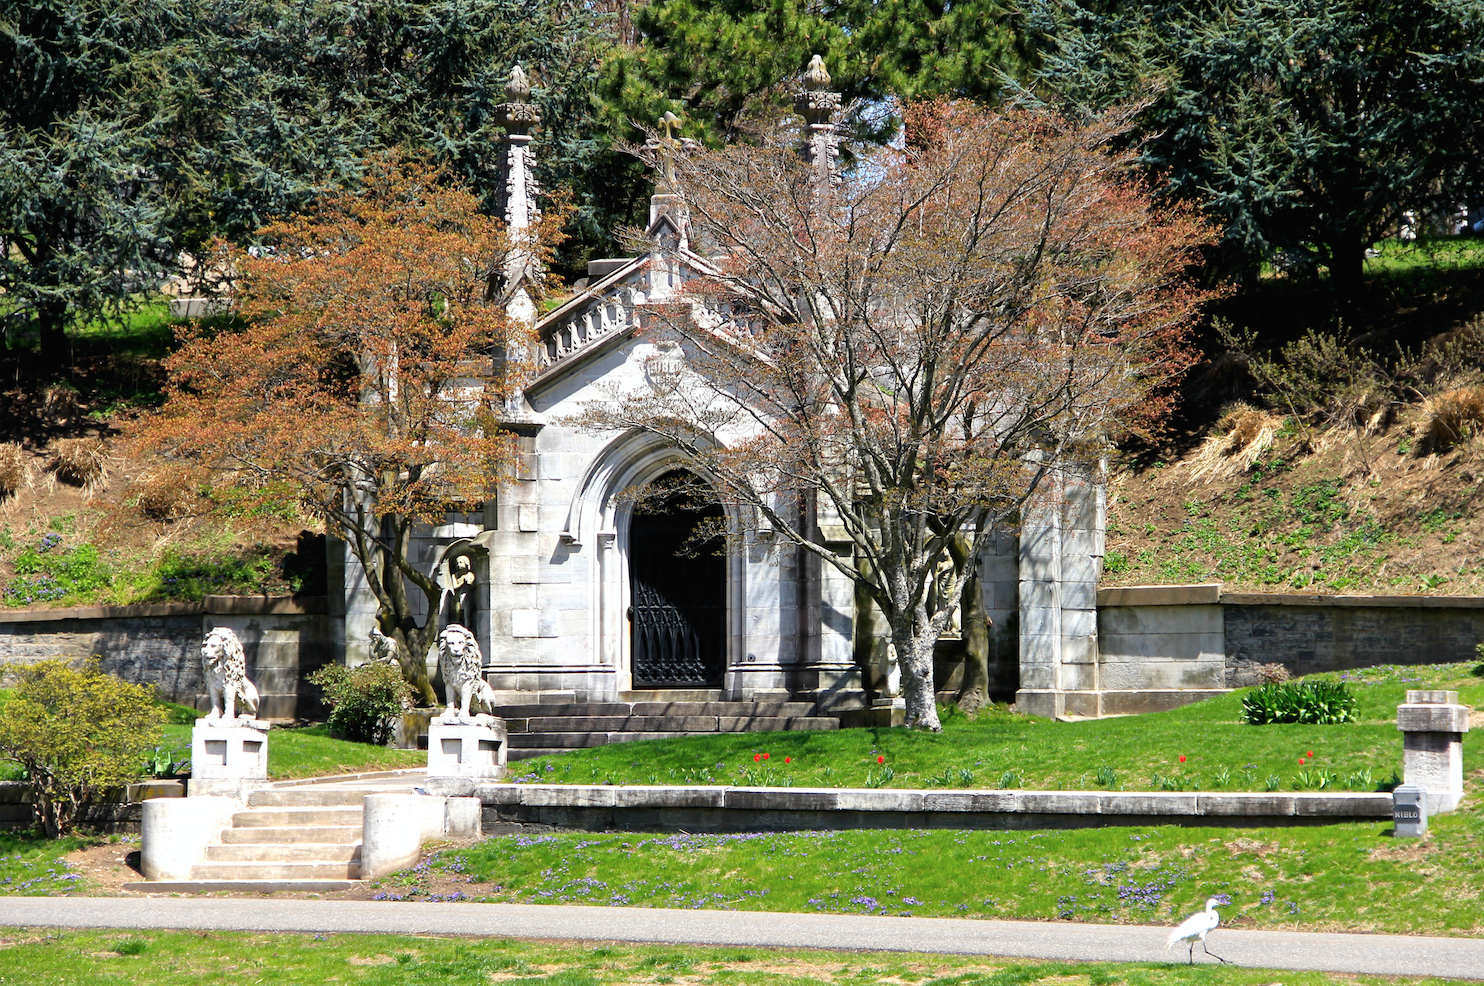 Get an exclusive look inside a giant mausoleum at Green-Wood Cemetery this weekend1484 x 986